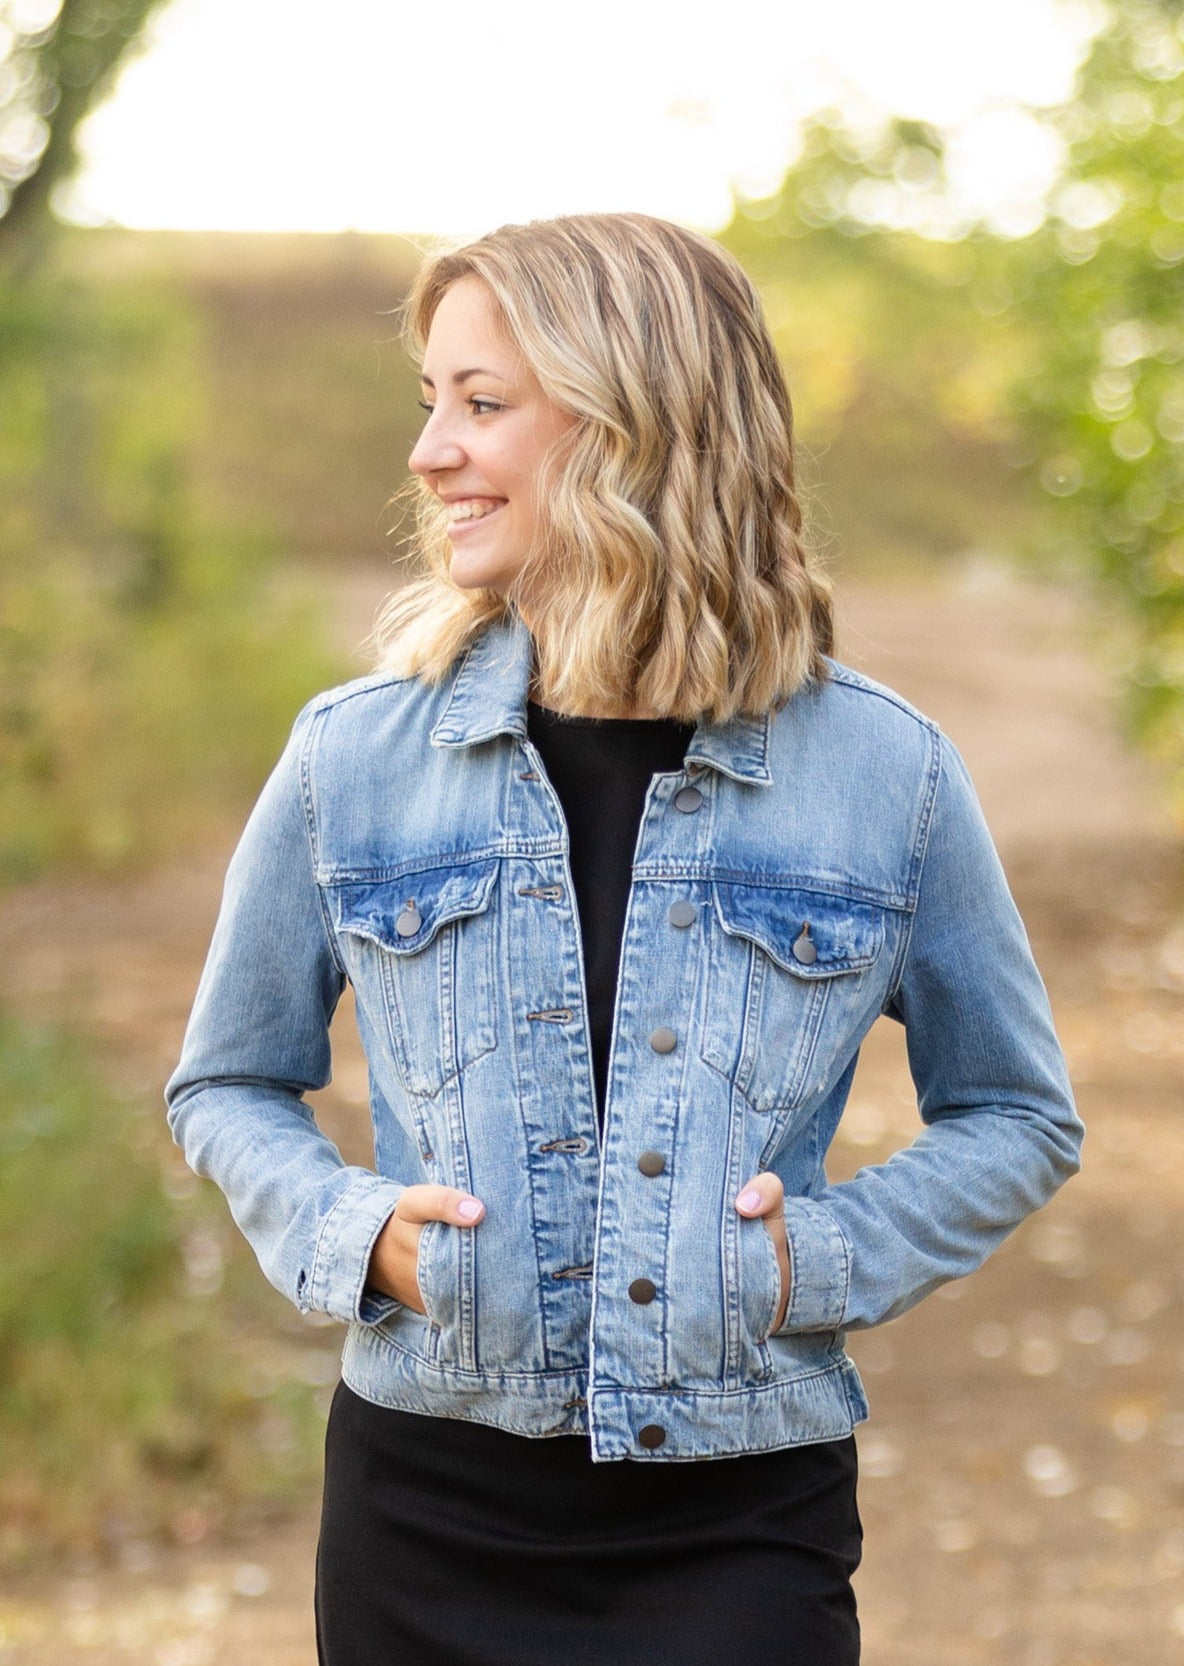 Fashionable, classic, soft and comfortable - no wardrobe essential is more of a style hero than this casual Light Wash Denim Jean Jacket. Pair this jacket with any bottoms, a basic tee, or cute blouse for a style that suits all. Made from soft 100% cotton fabric this denim jacket is designed to comfort all-day.